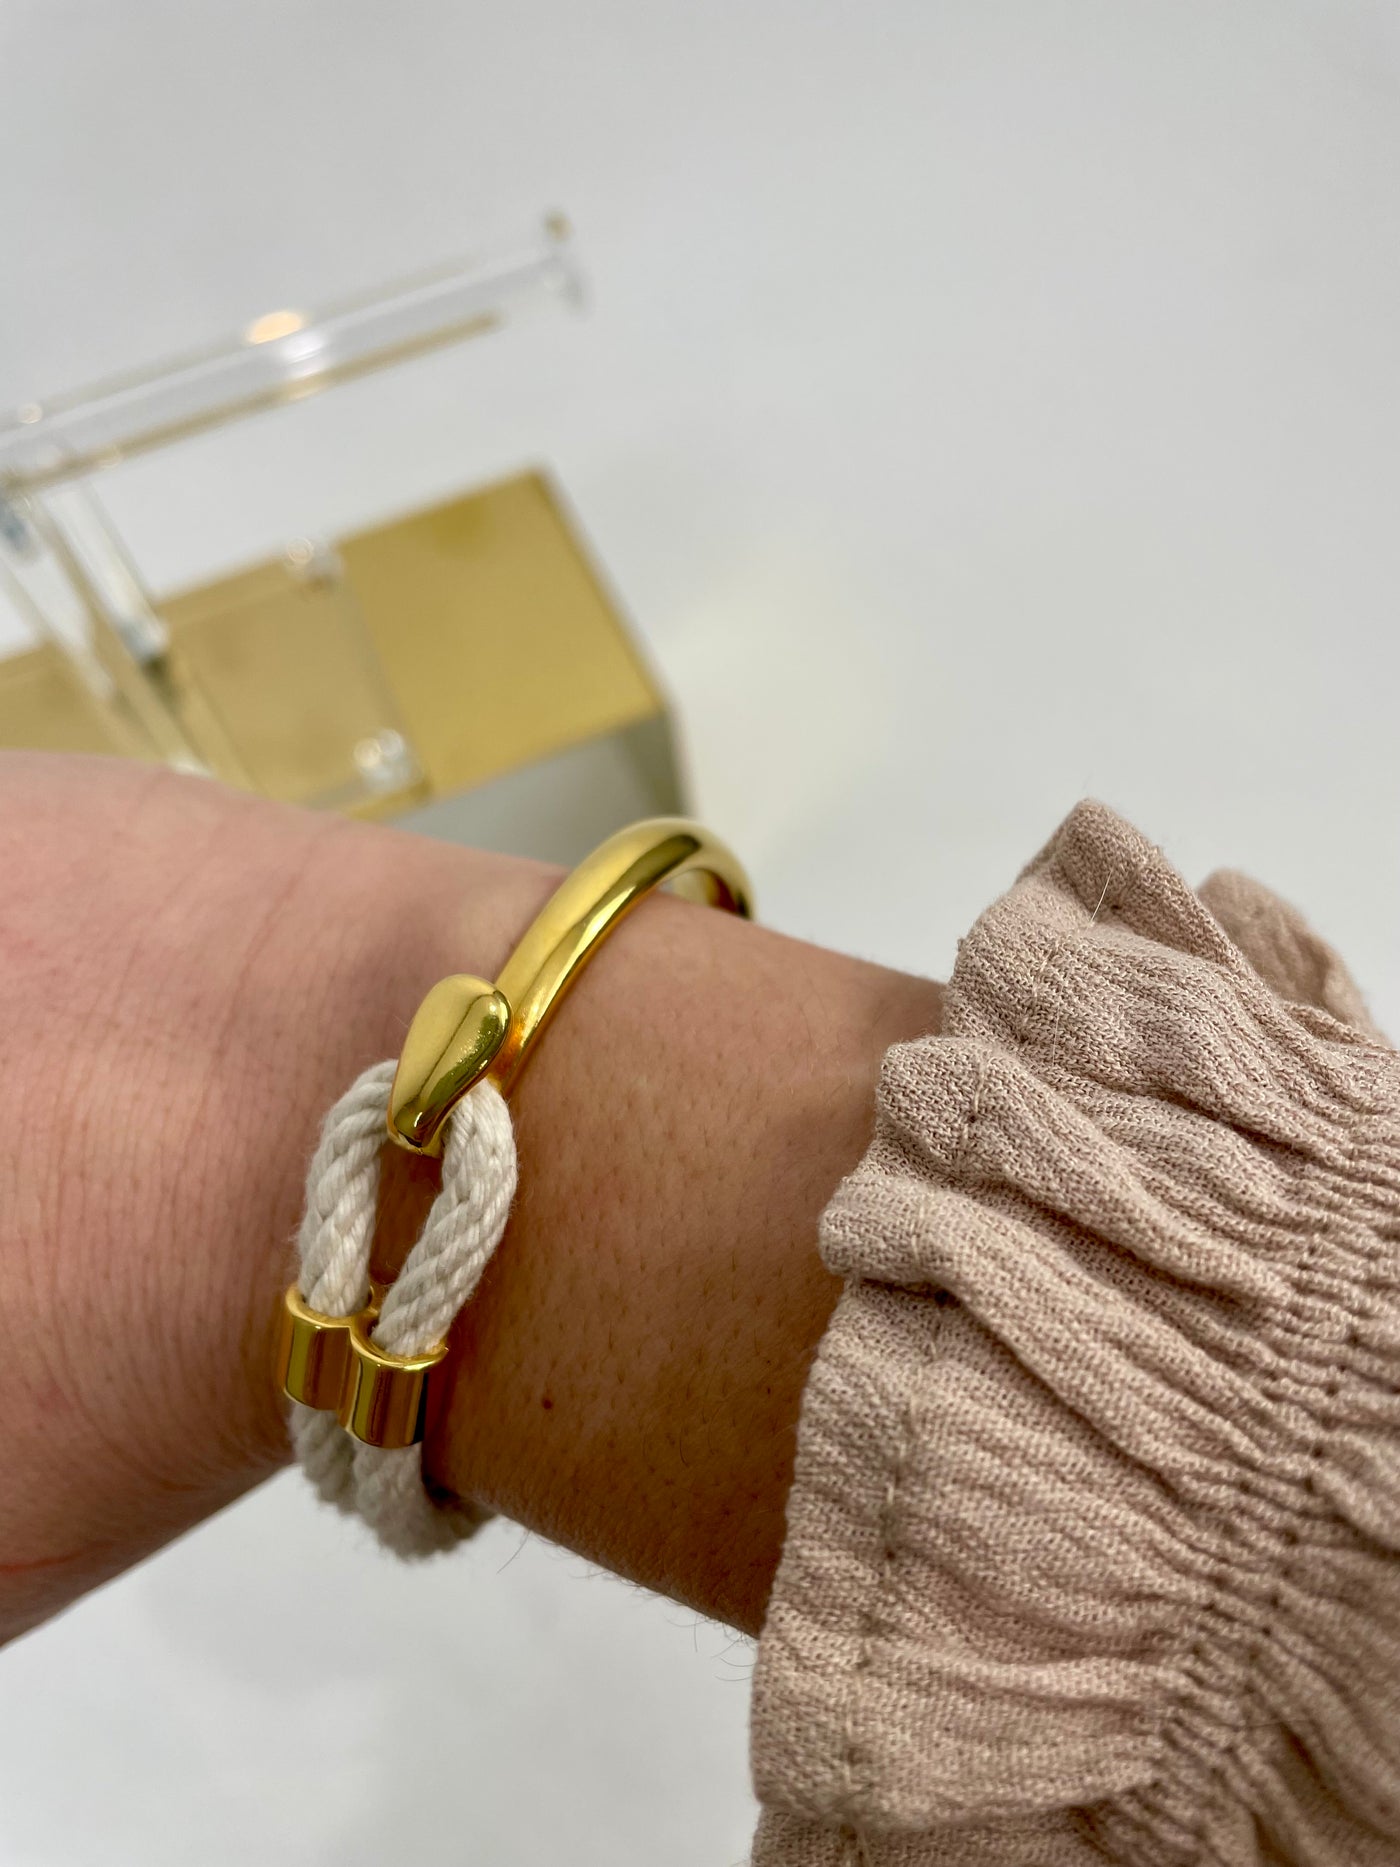 Half gold plated and half natural rope with a hook closure detail makes this bracelet a New England classic. Coast bracelet that is handmade by a small woman owned business from the south shore here in New England.